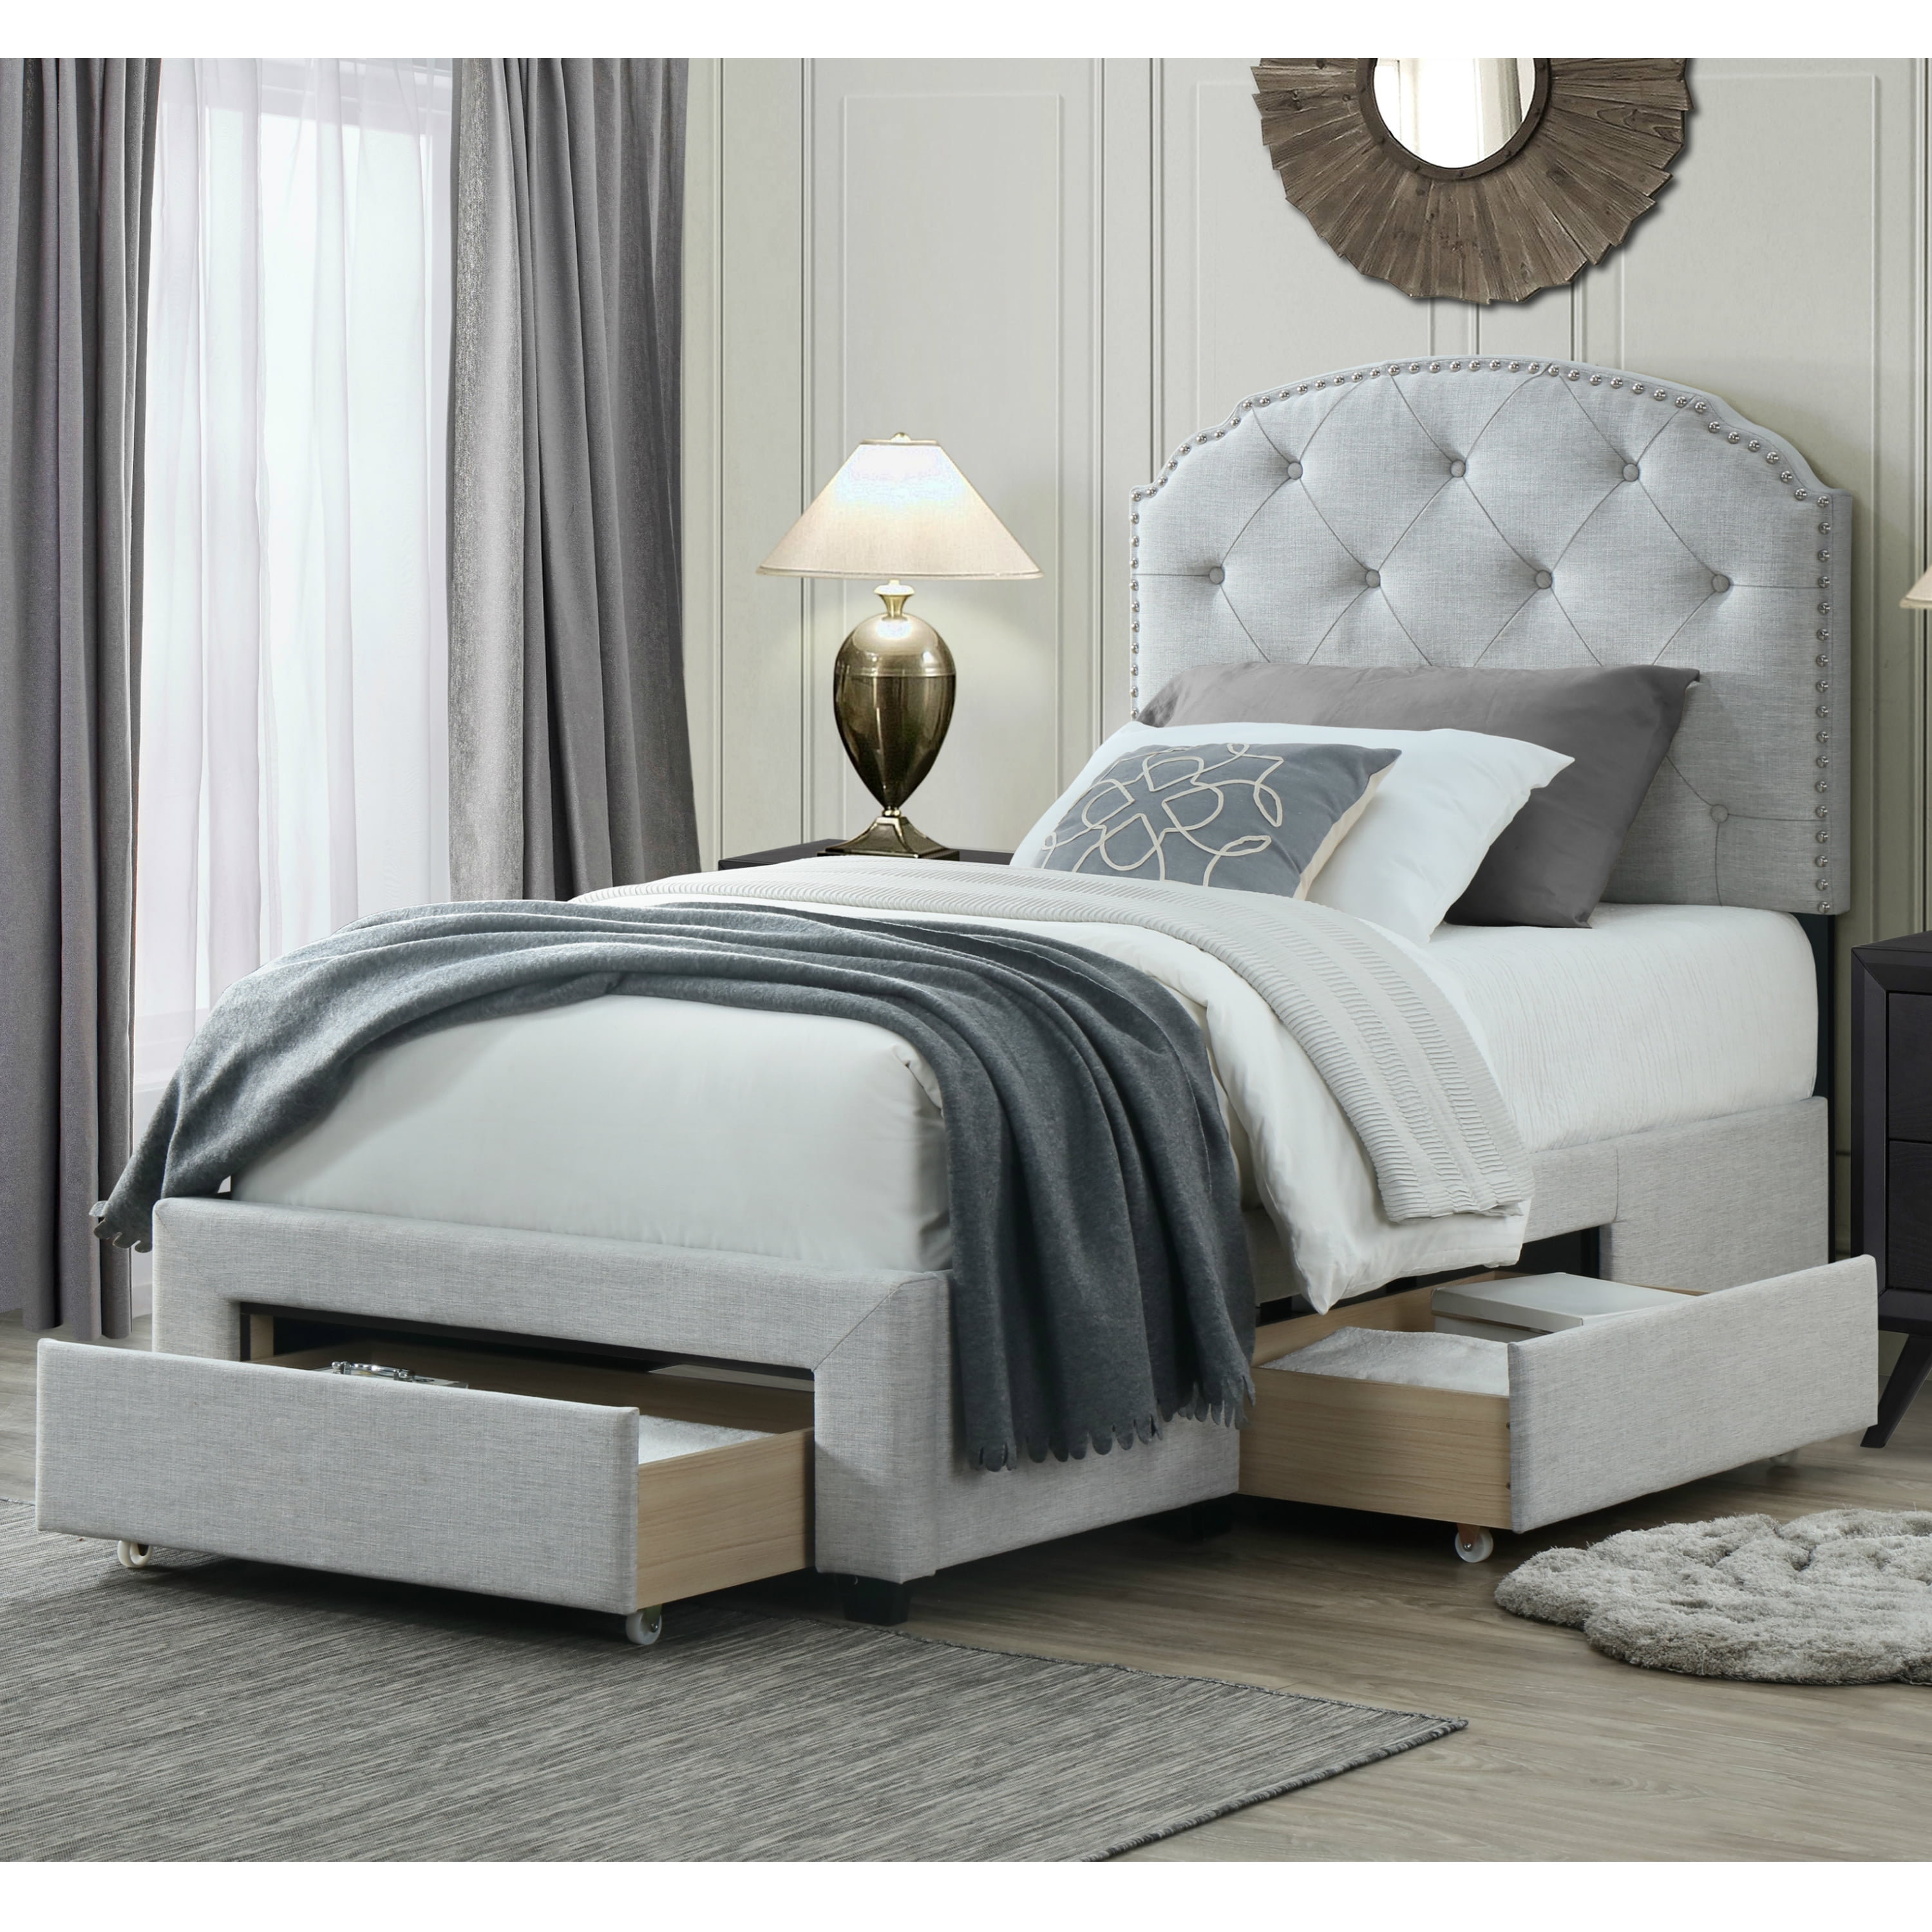 DG Casa Argo Tufted Upholstered Panel Bed Frame with Storage Drawers